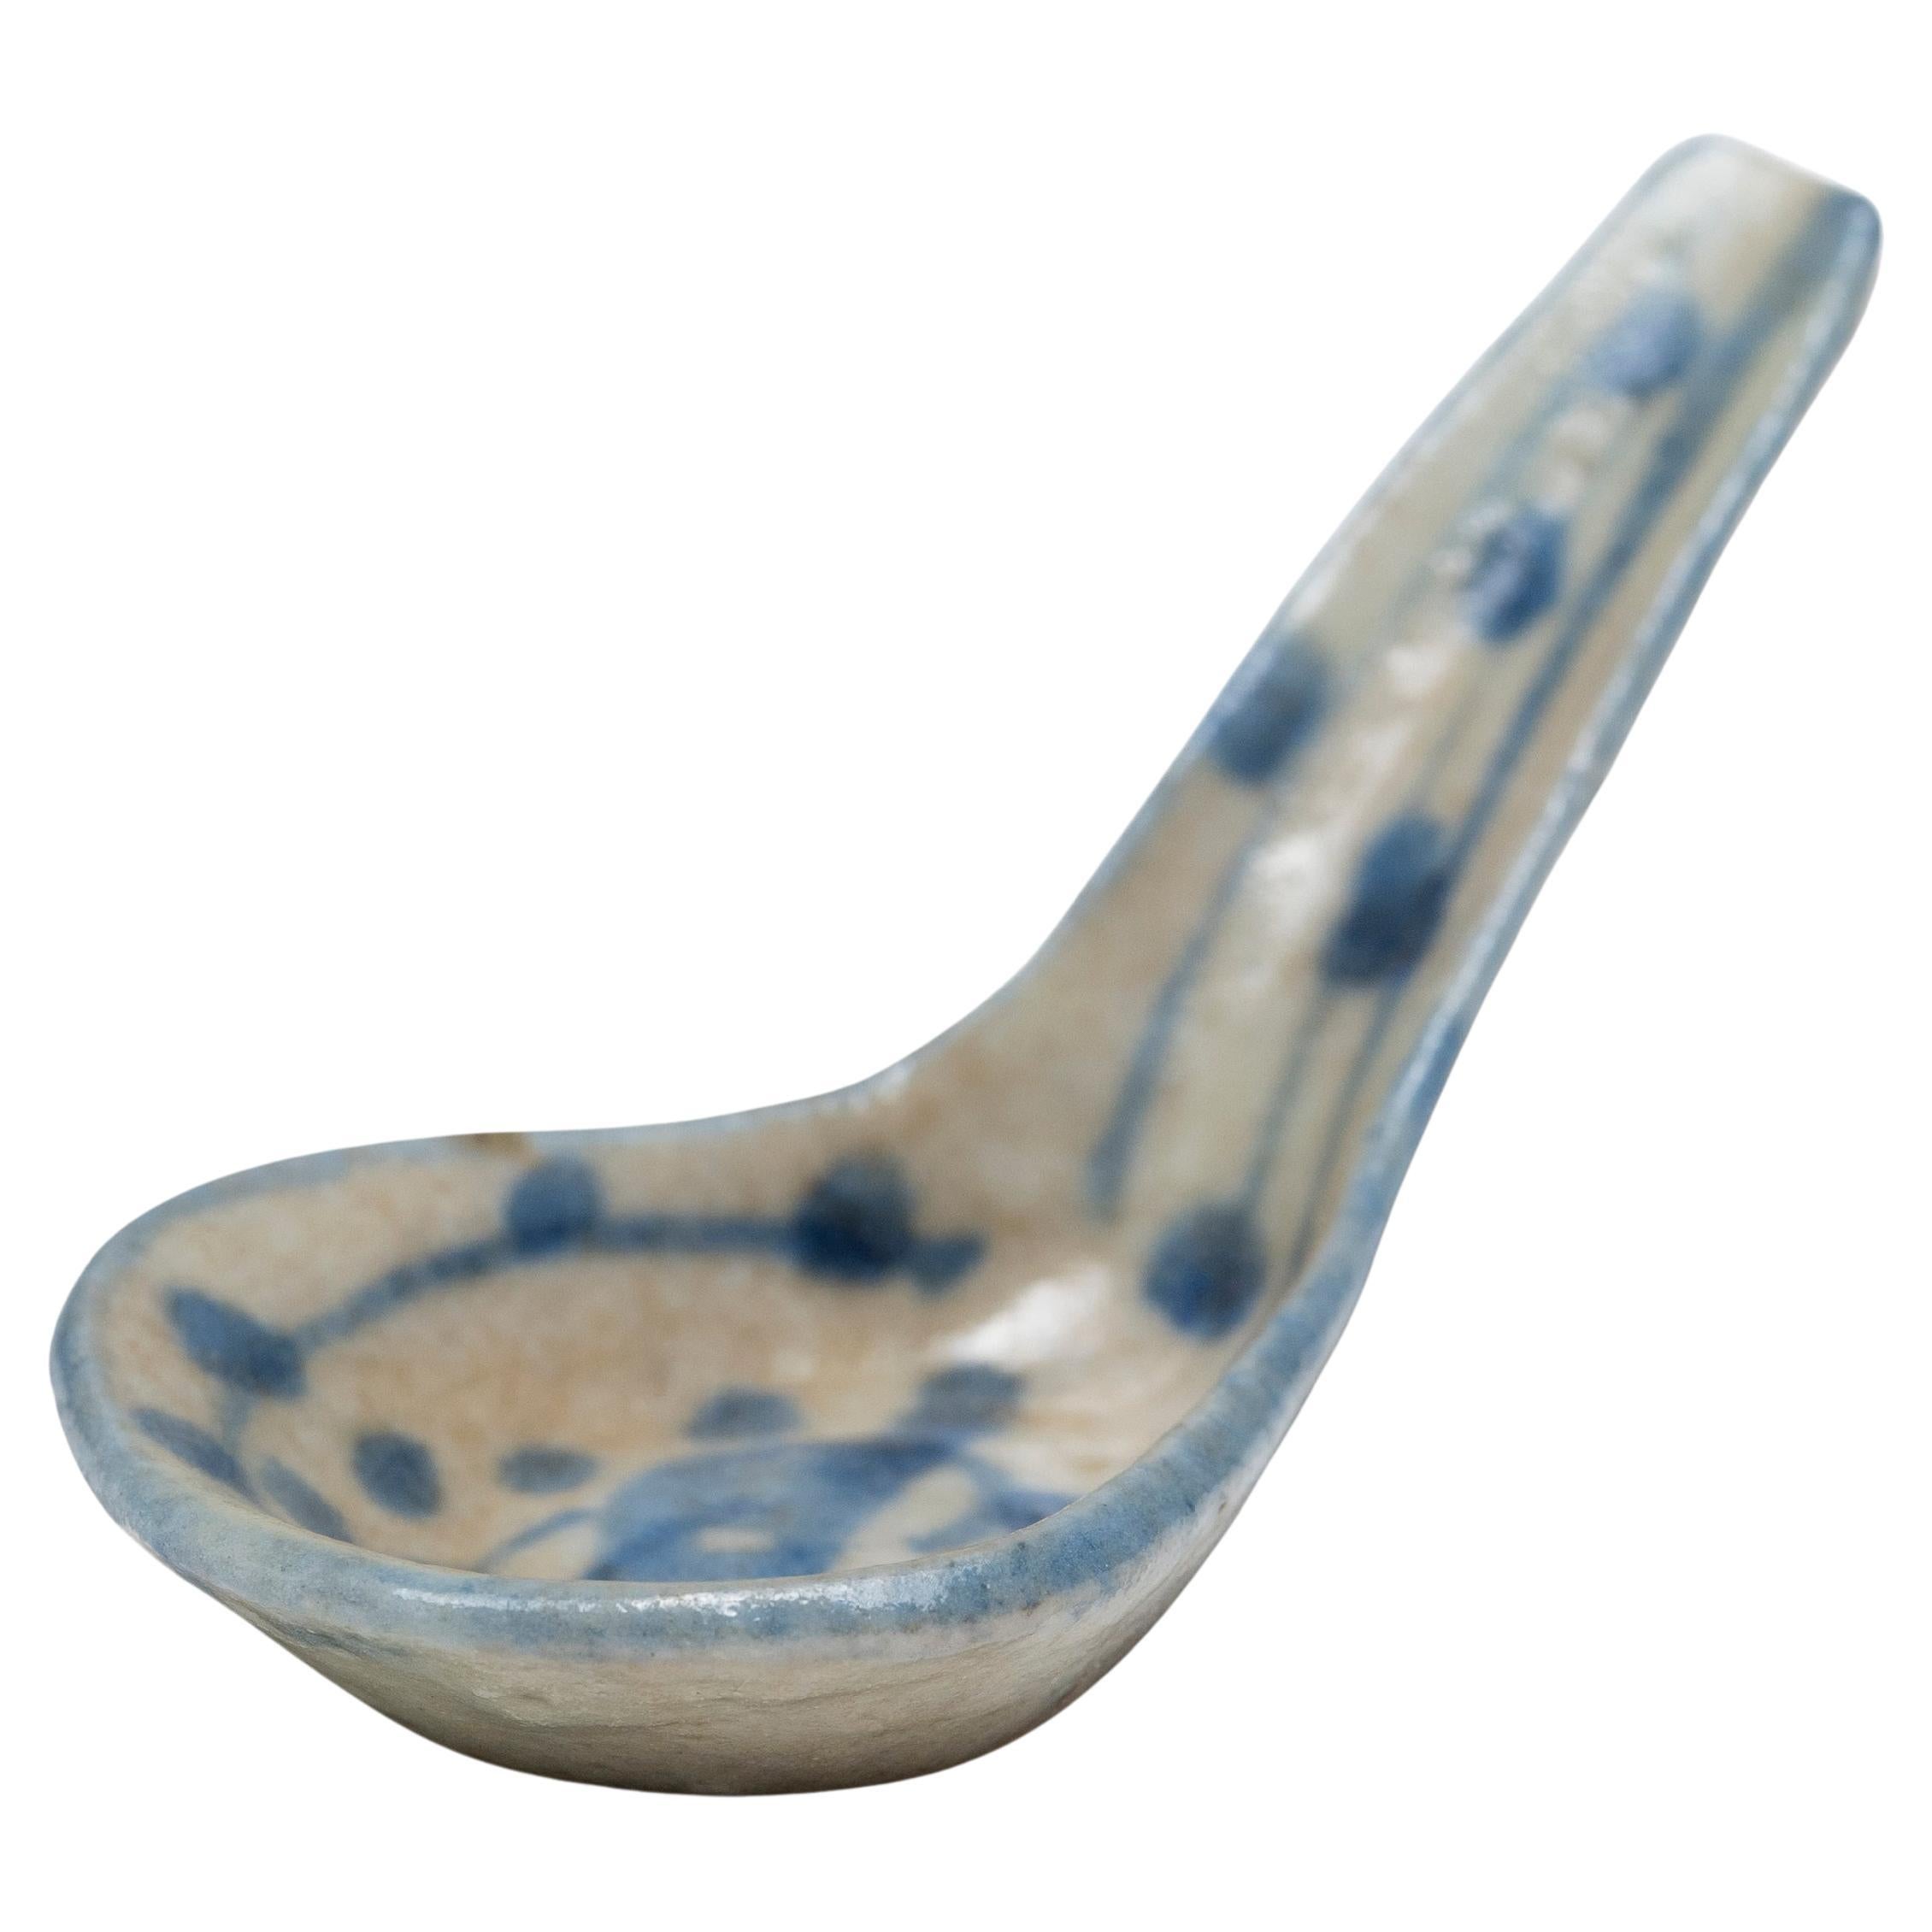 Chinese Blue and White Spoon, c. 1850